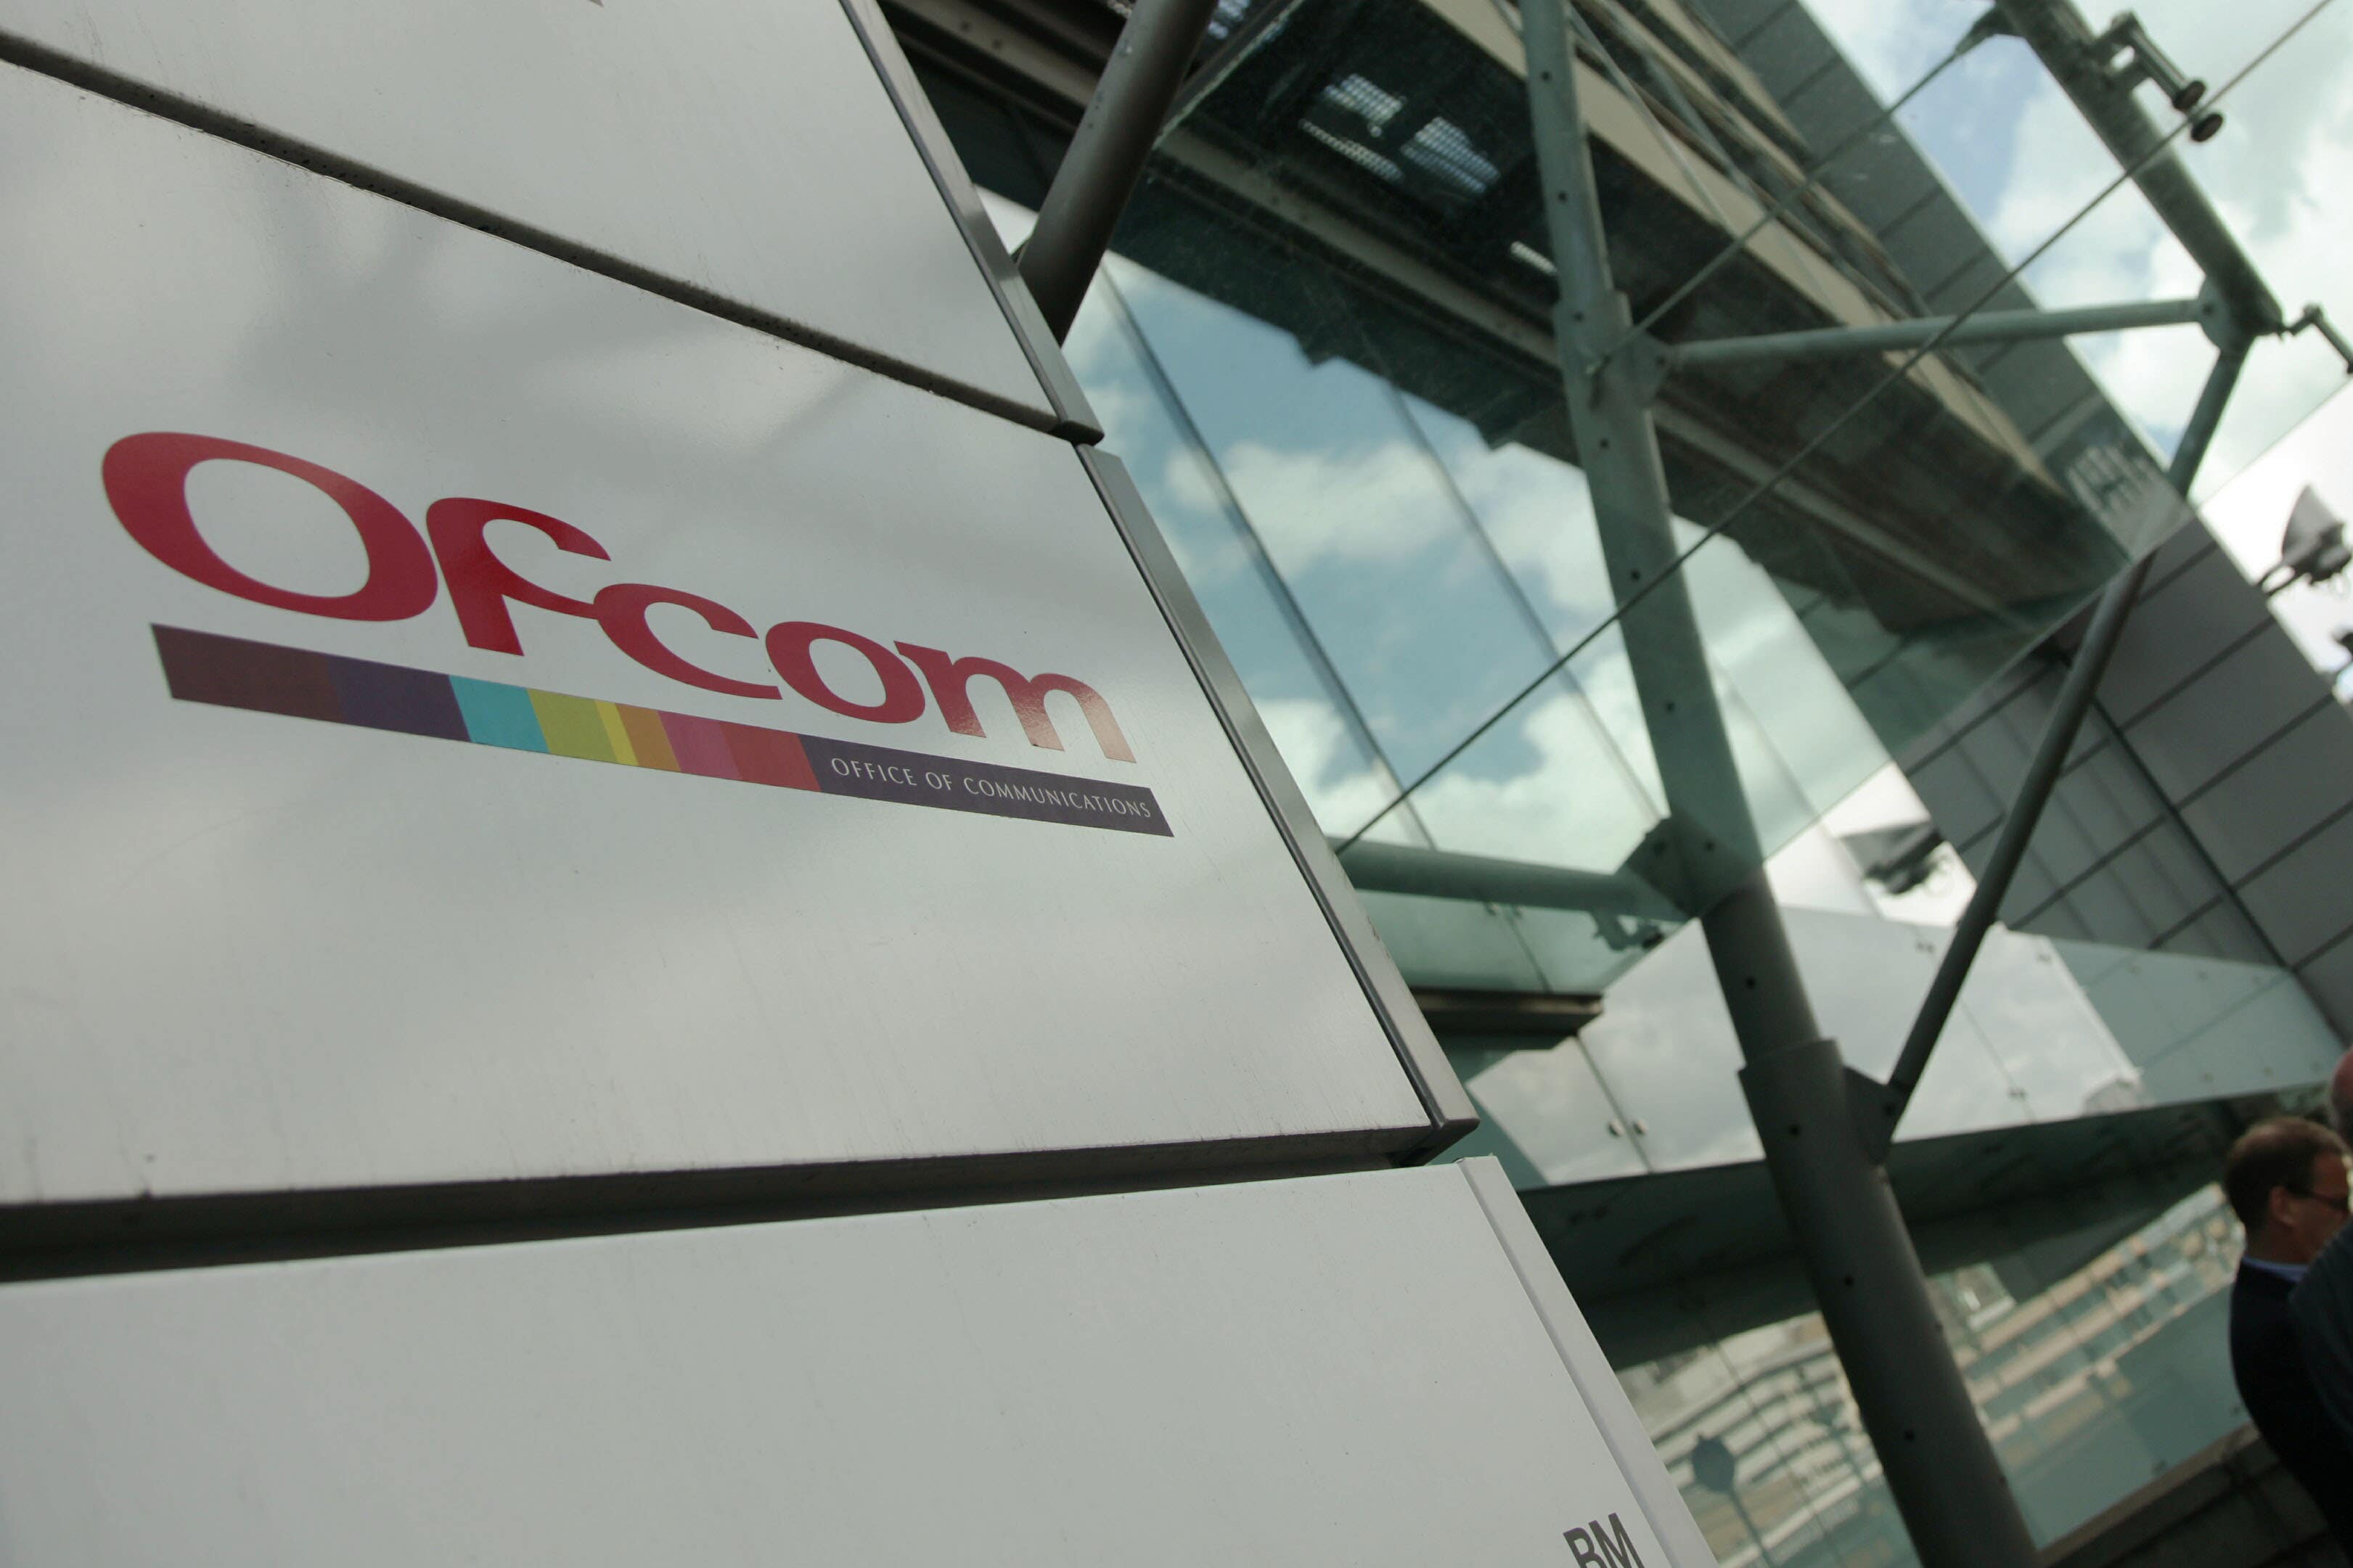 Ofcome has launched an investigation into GB News (Office of Communications) in Southwark, London. (Yui Mok/PA)